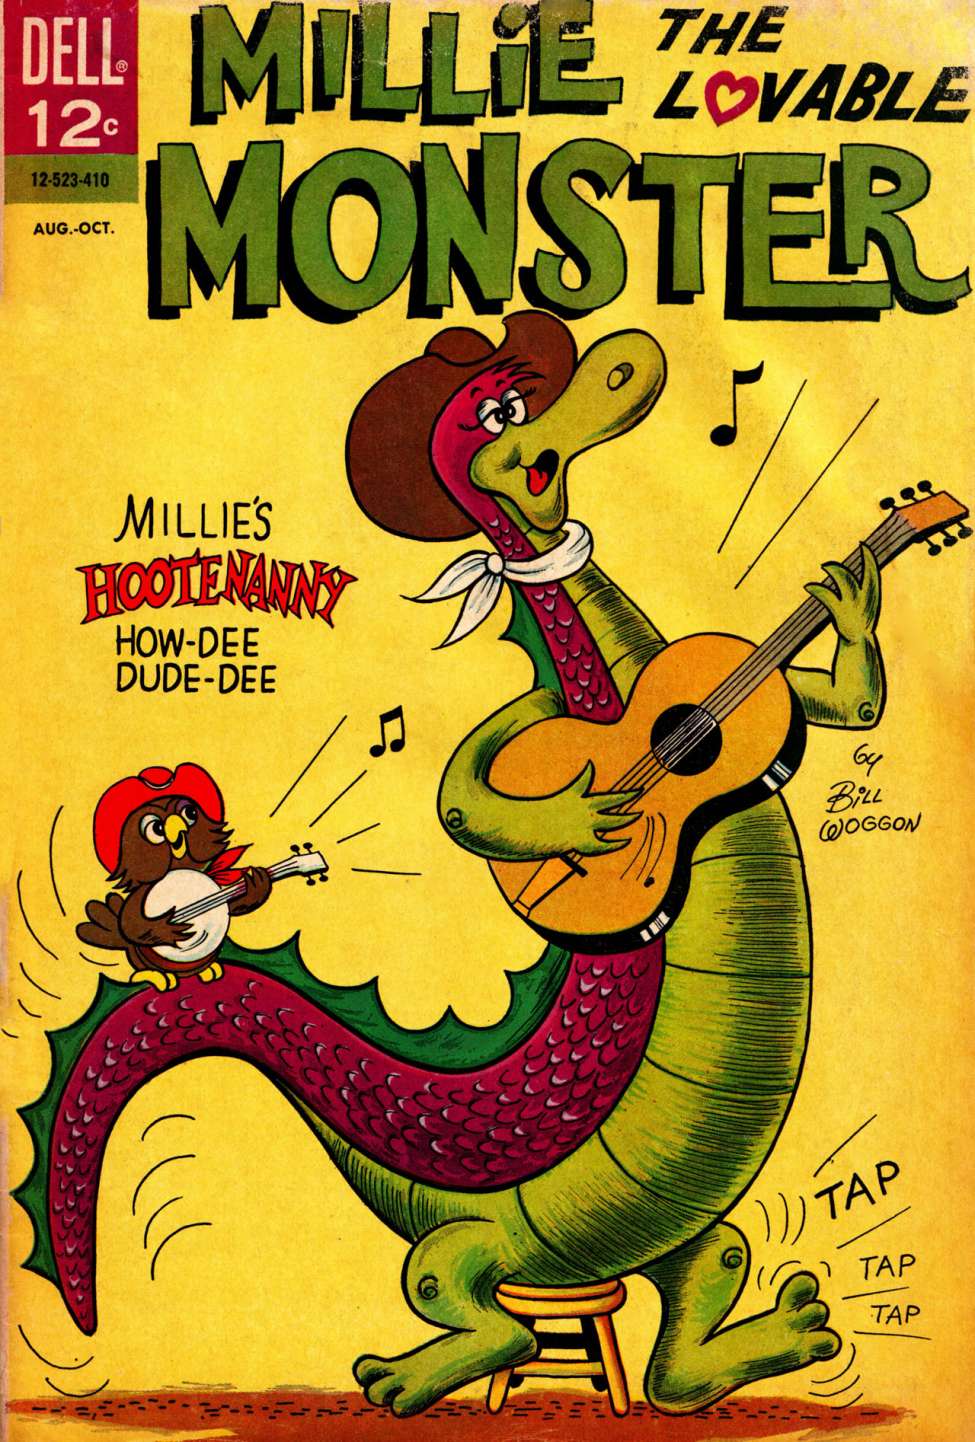 Book Cover For Millie the Lovable Monster 3